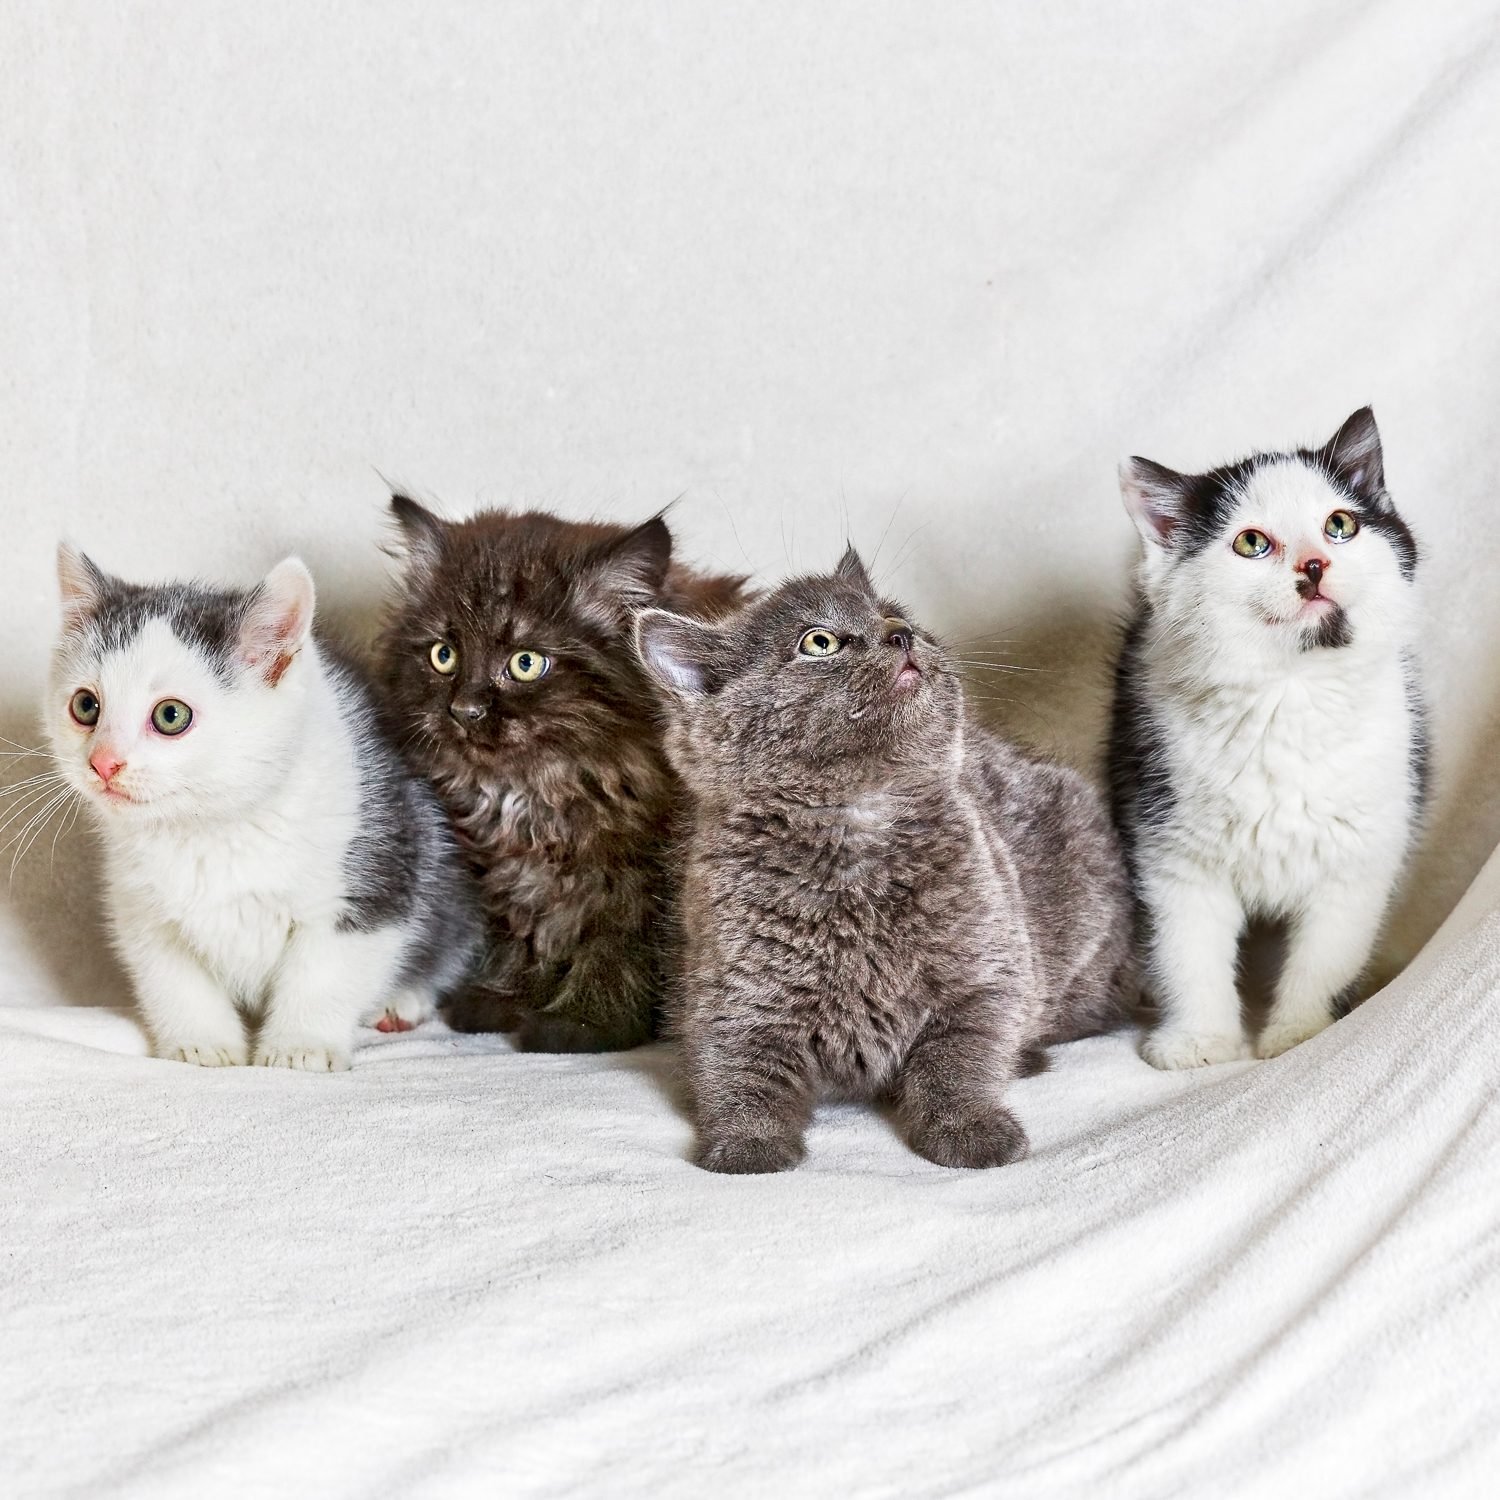 Four cats on a white sheet